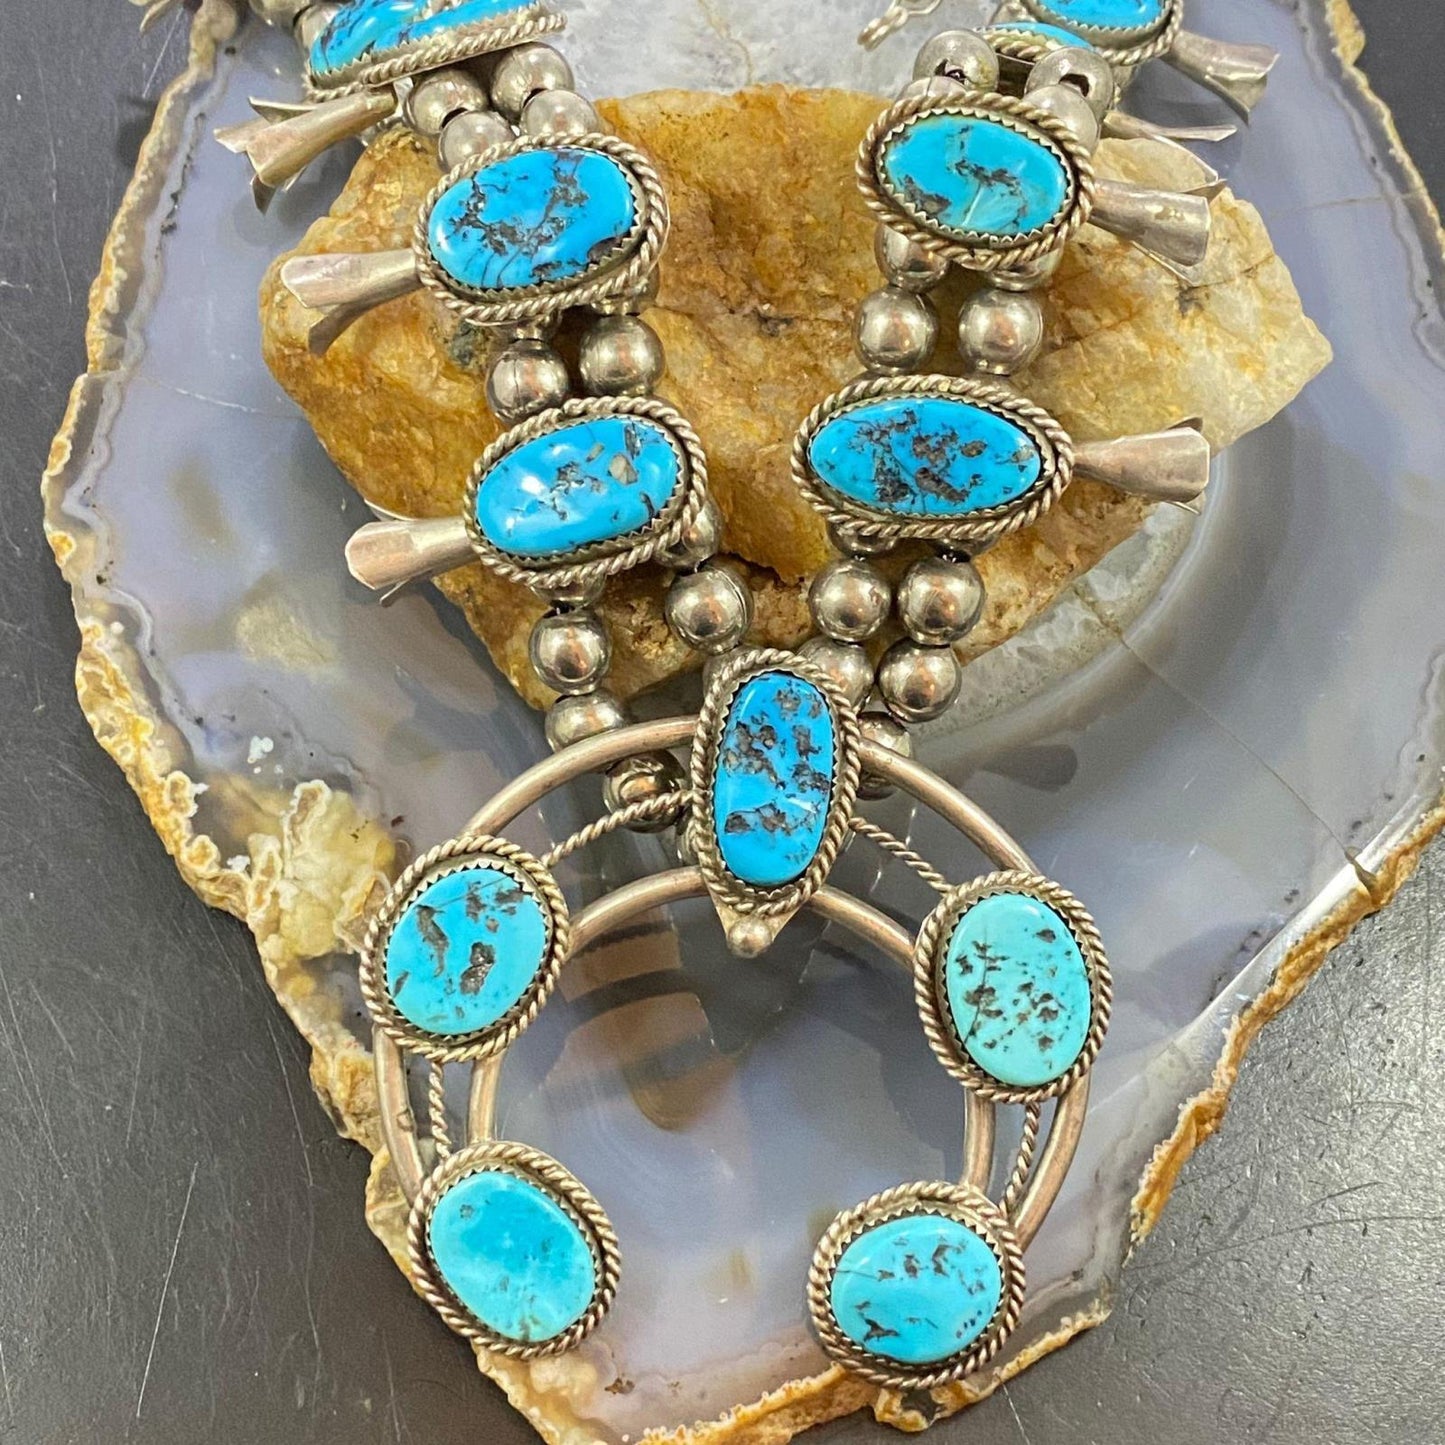 Vintage Native American Silver Oval Kingman Turquoise Squash Blossom Necklace